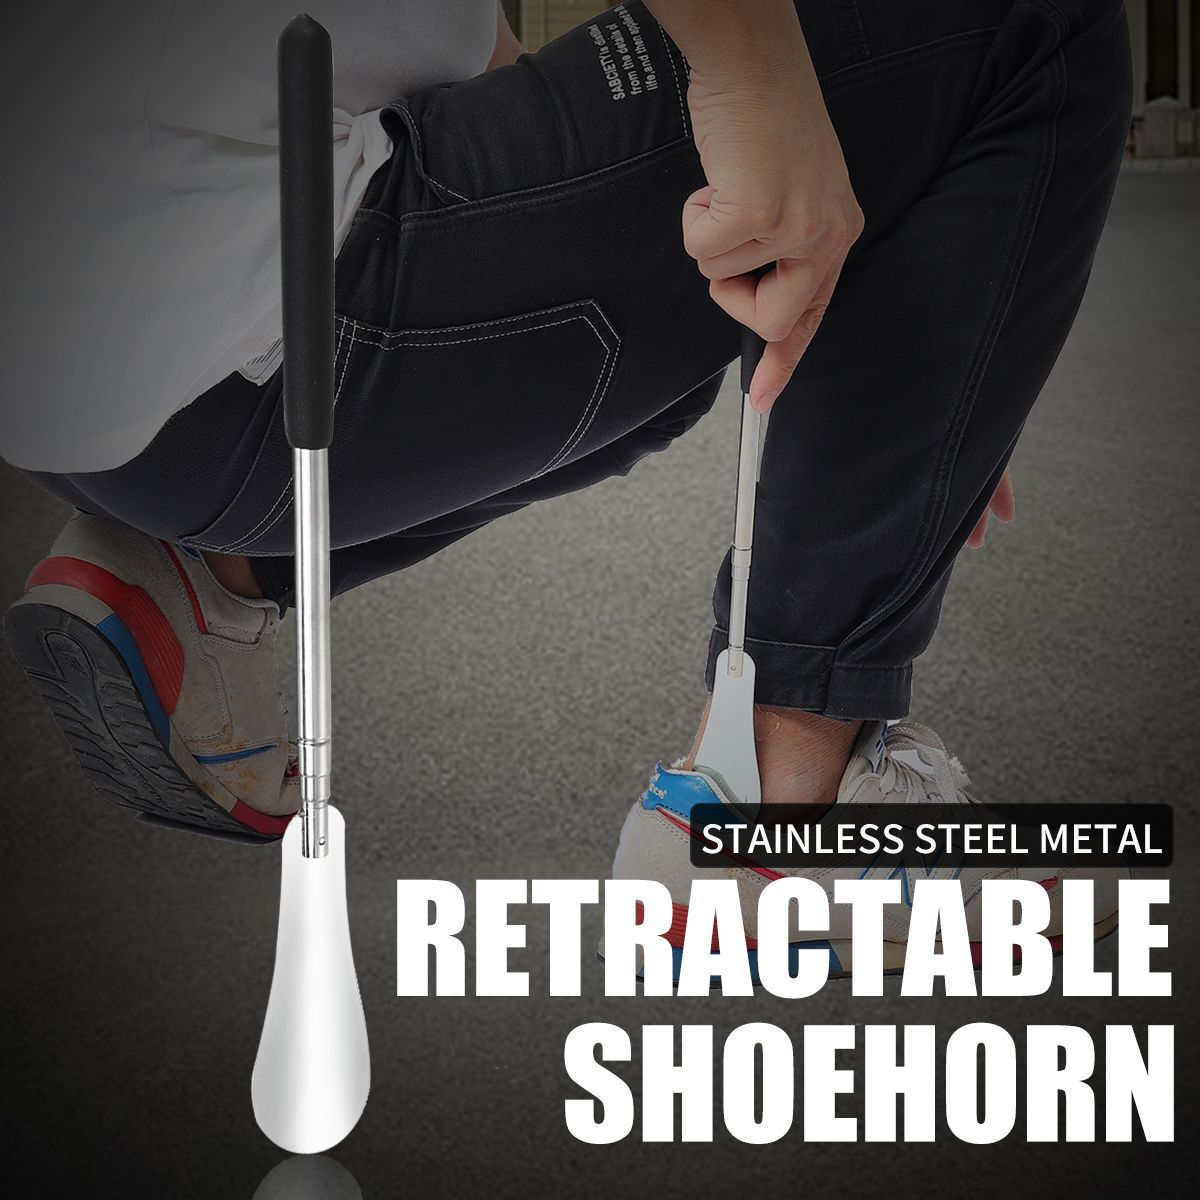 Long-Shoe-Horn-Shoehorn-Stainless-Steel-Metal-Shoes-Remover-Retractable-Long-Shoe-Horn-1619764